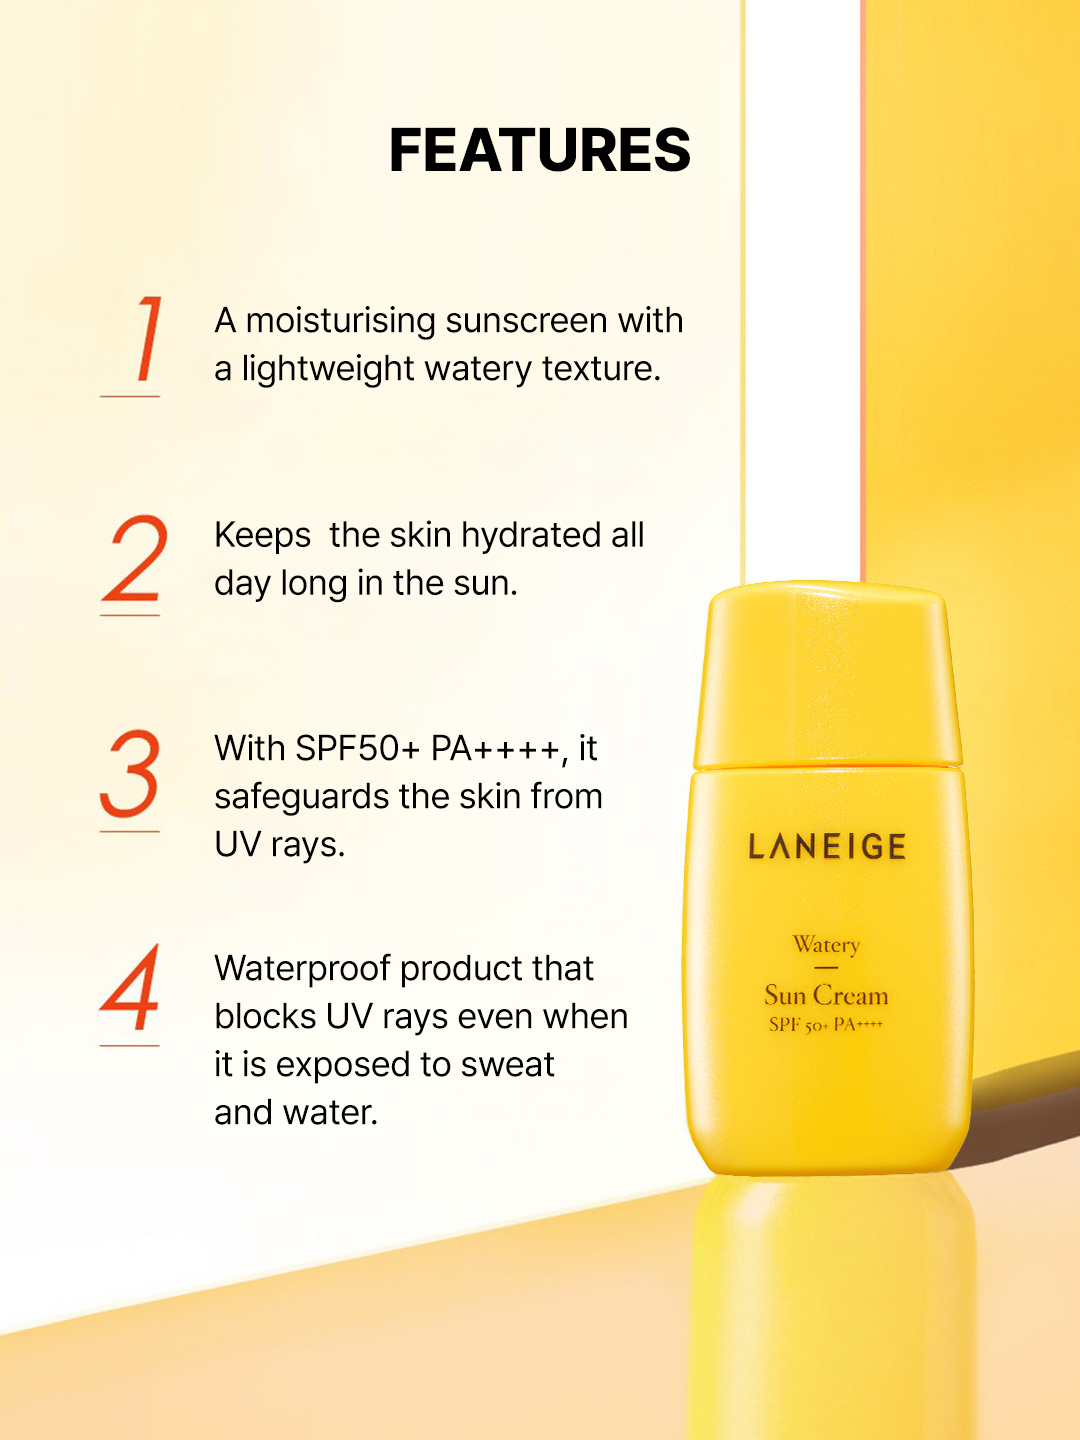 LANEIGE Watery Sun Cream page two.